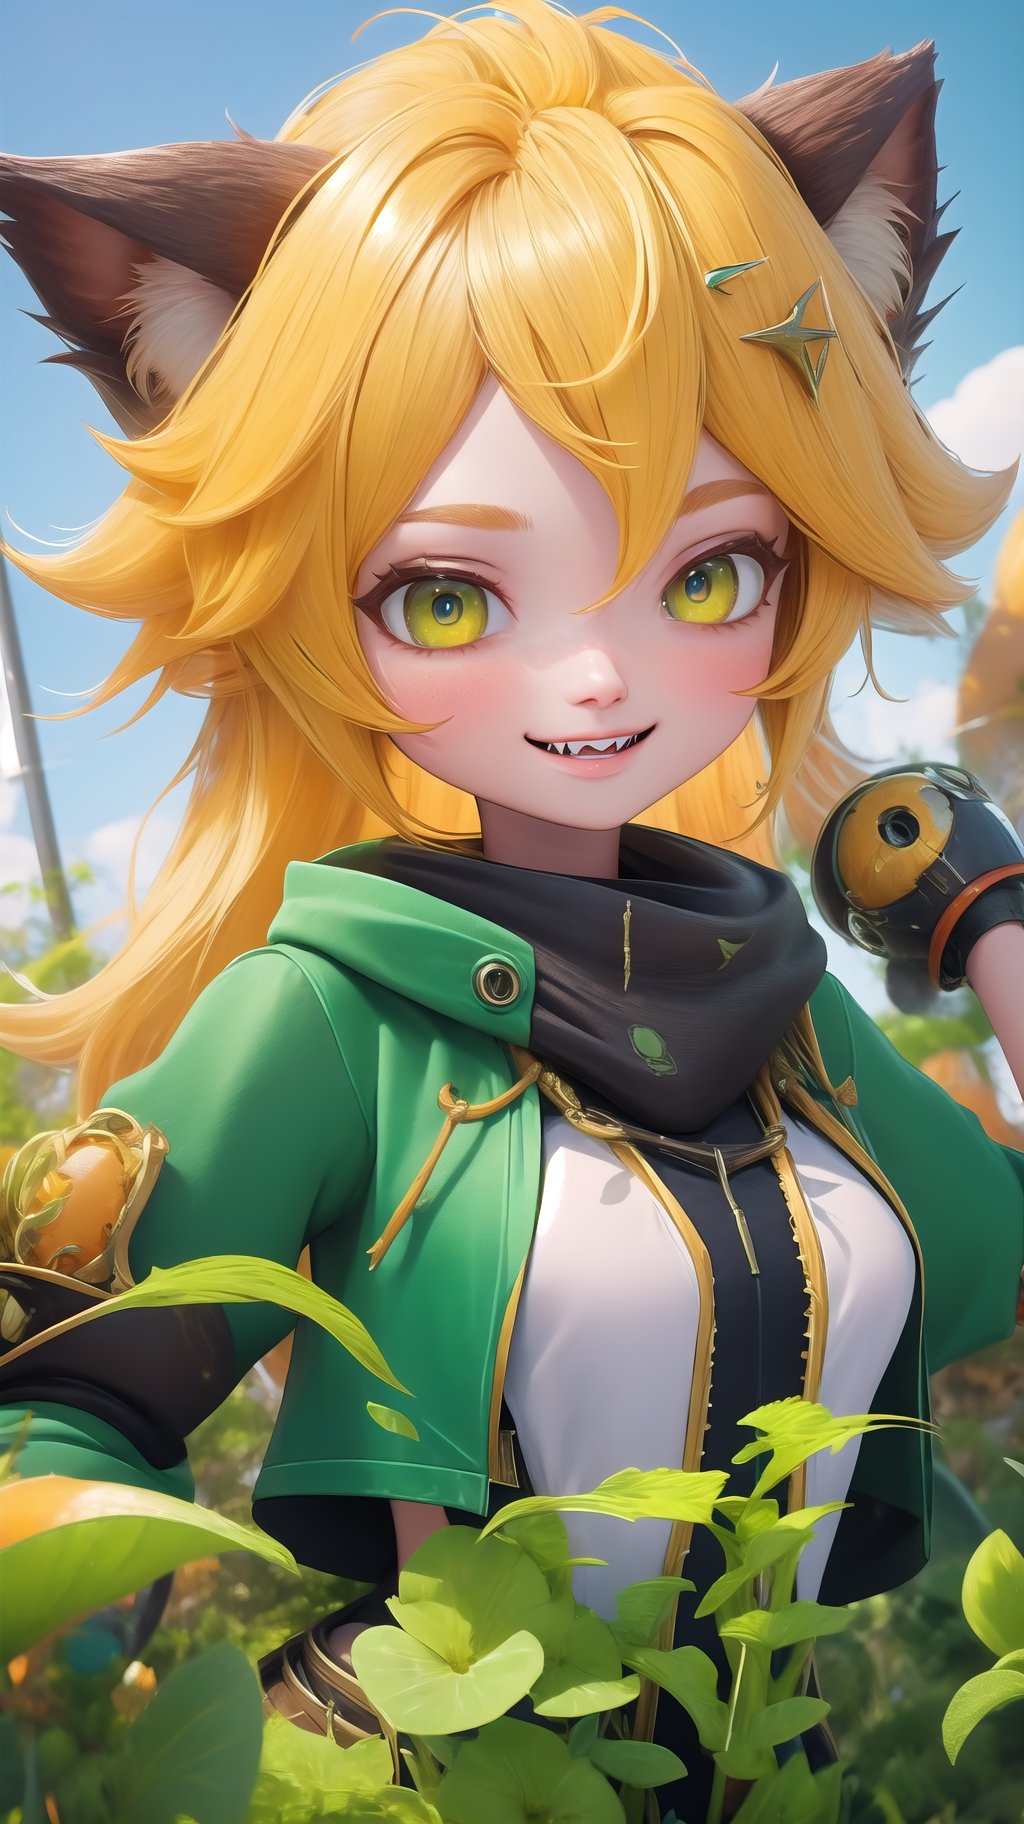 (masterpiece, top quality), intricate details, thin, ((slim)), beautiful girl, teenage woman, Yellow hair, white skin, light yellow eyes, cat ears, sharp jawline, cropped jacket, messy hair, lips , fangs, upper body, almost awake, grinning, happy, excited pet pose,1GIRL MINATO_AQUA,mecha,pole_dancing,car,DonMG414 